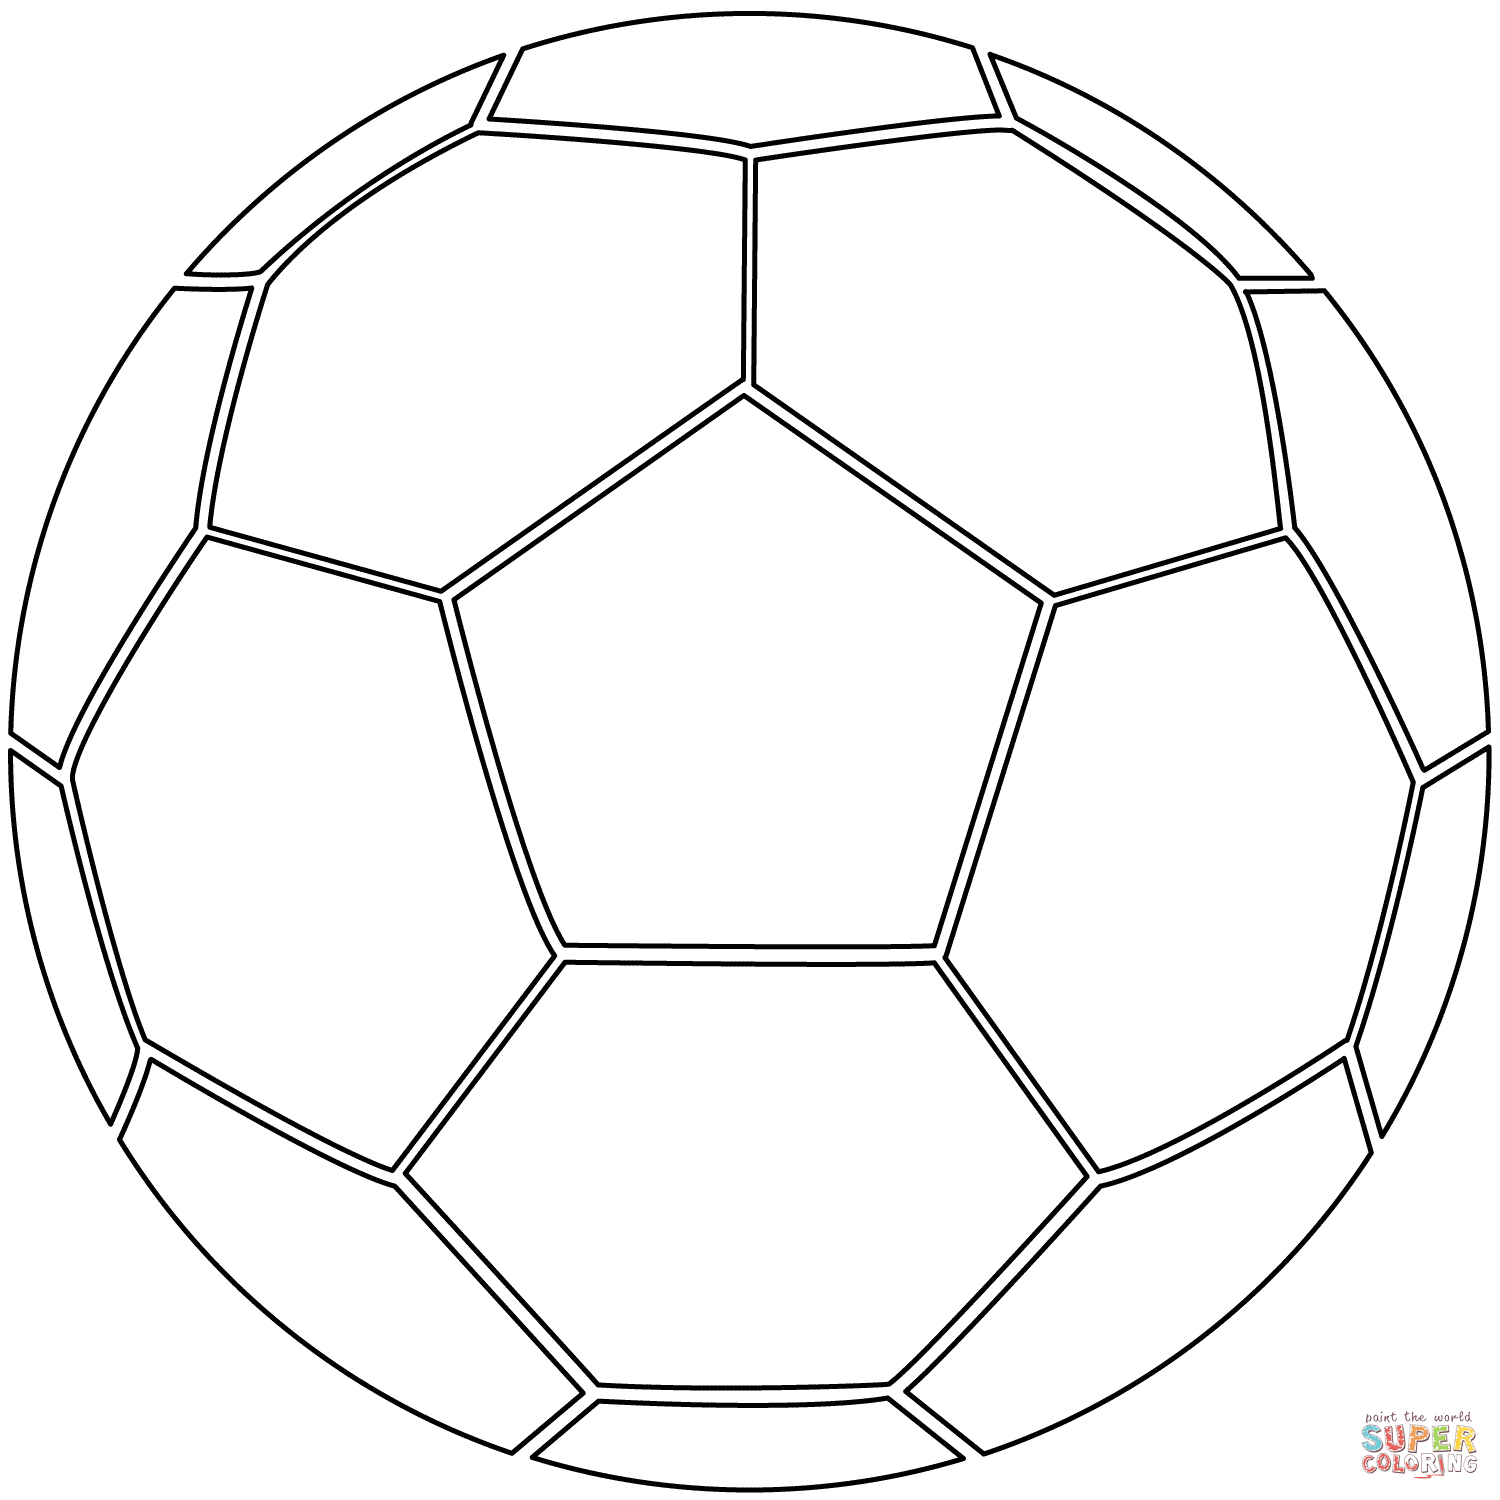 Soccer Ball coloring page | Free Printable Coloring Pages